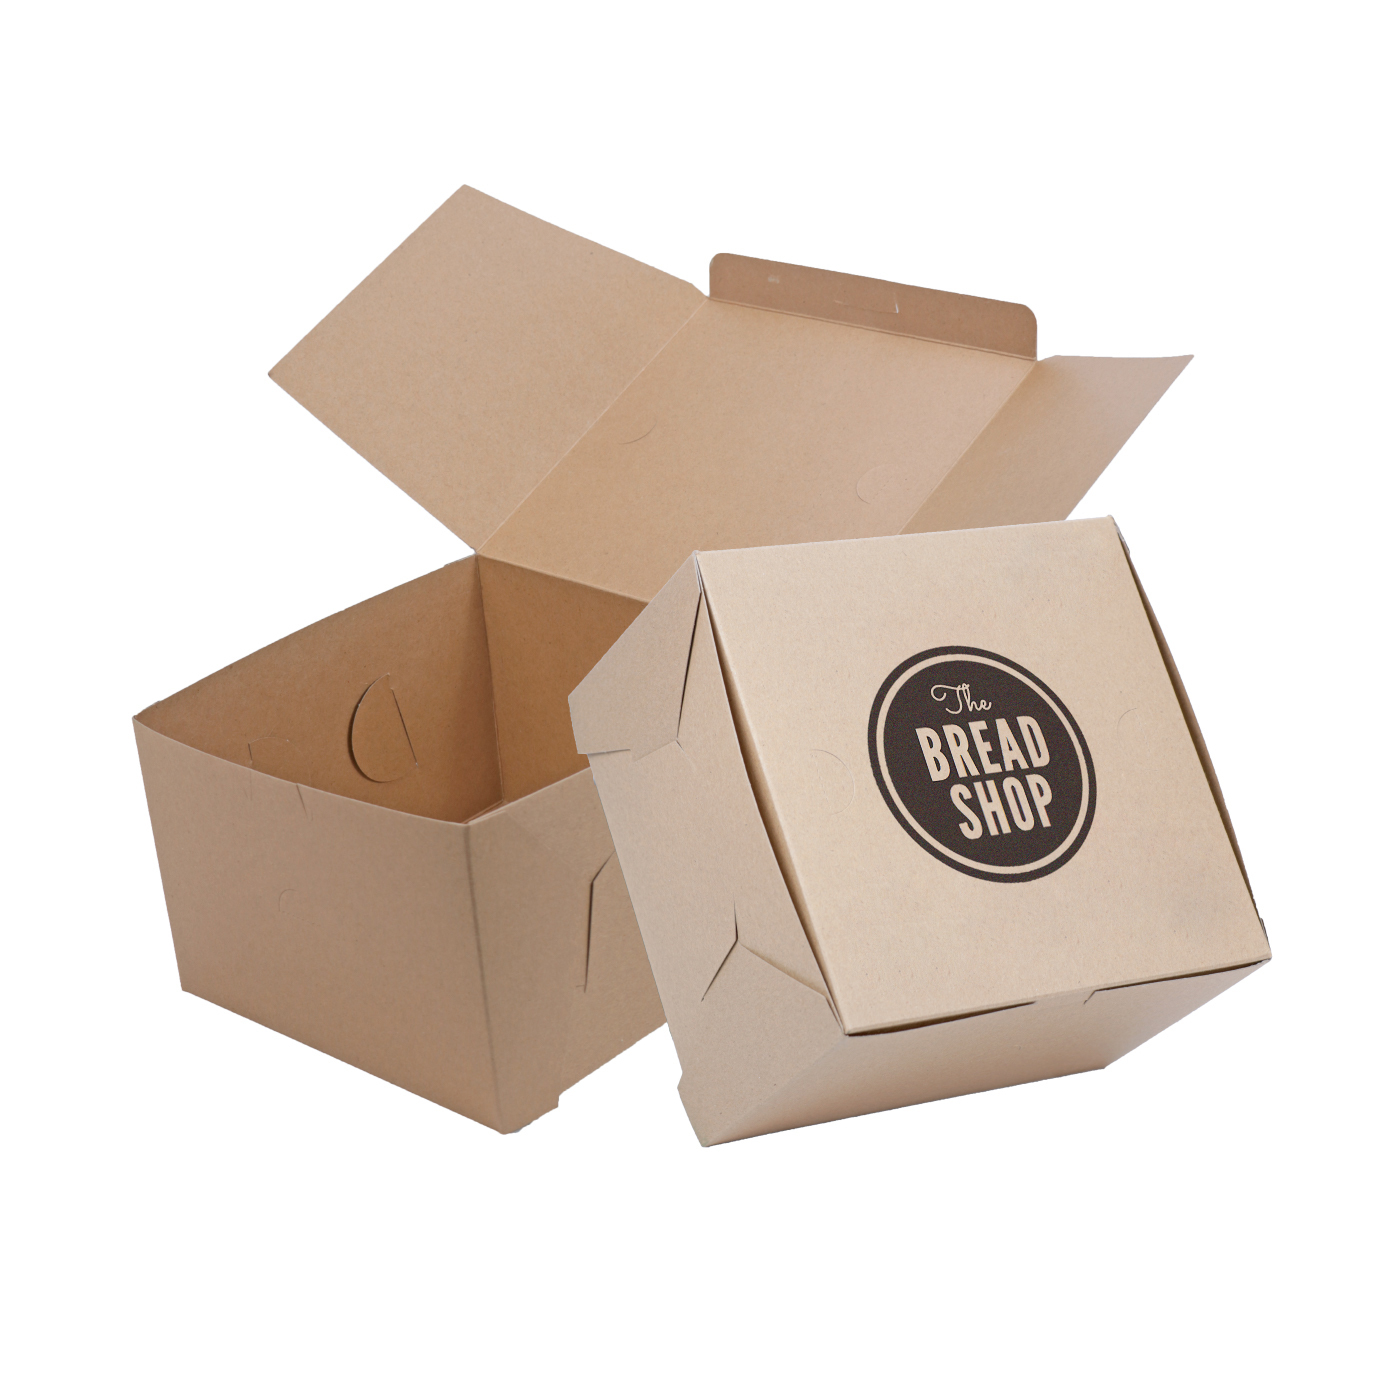 https://www.customboxesandpackaging.com/assets/images/content/CakeBox_TheBreadShop.jpg